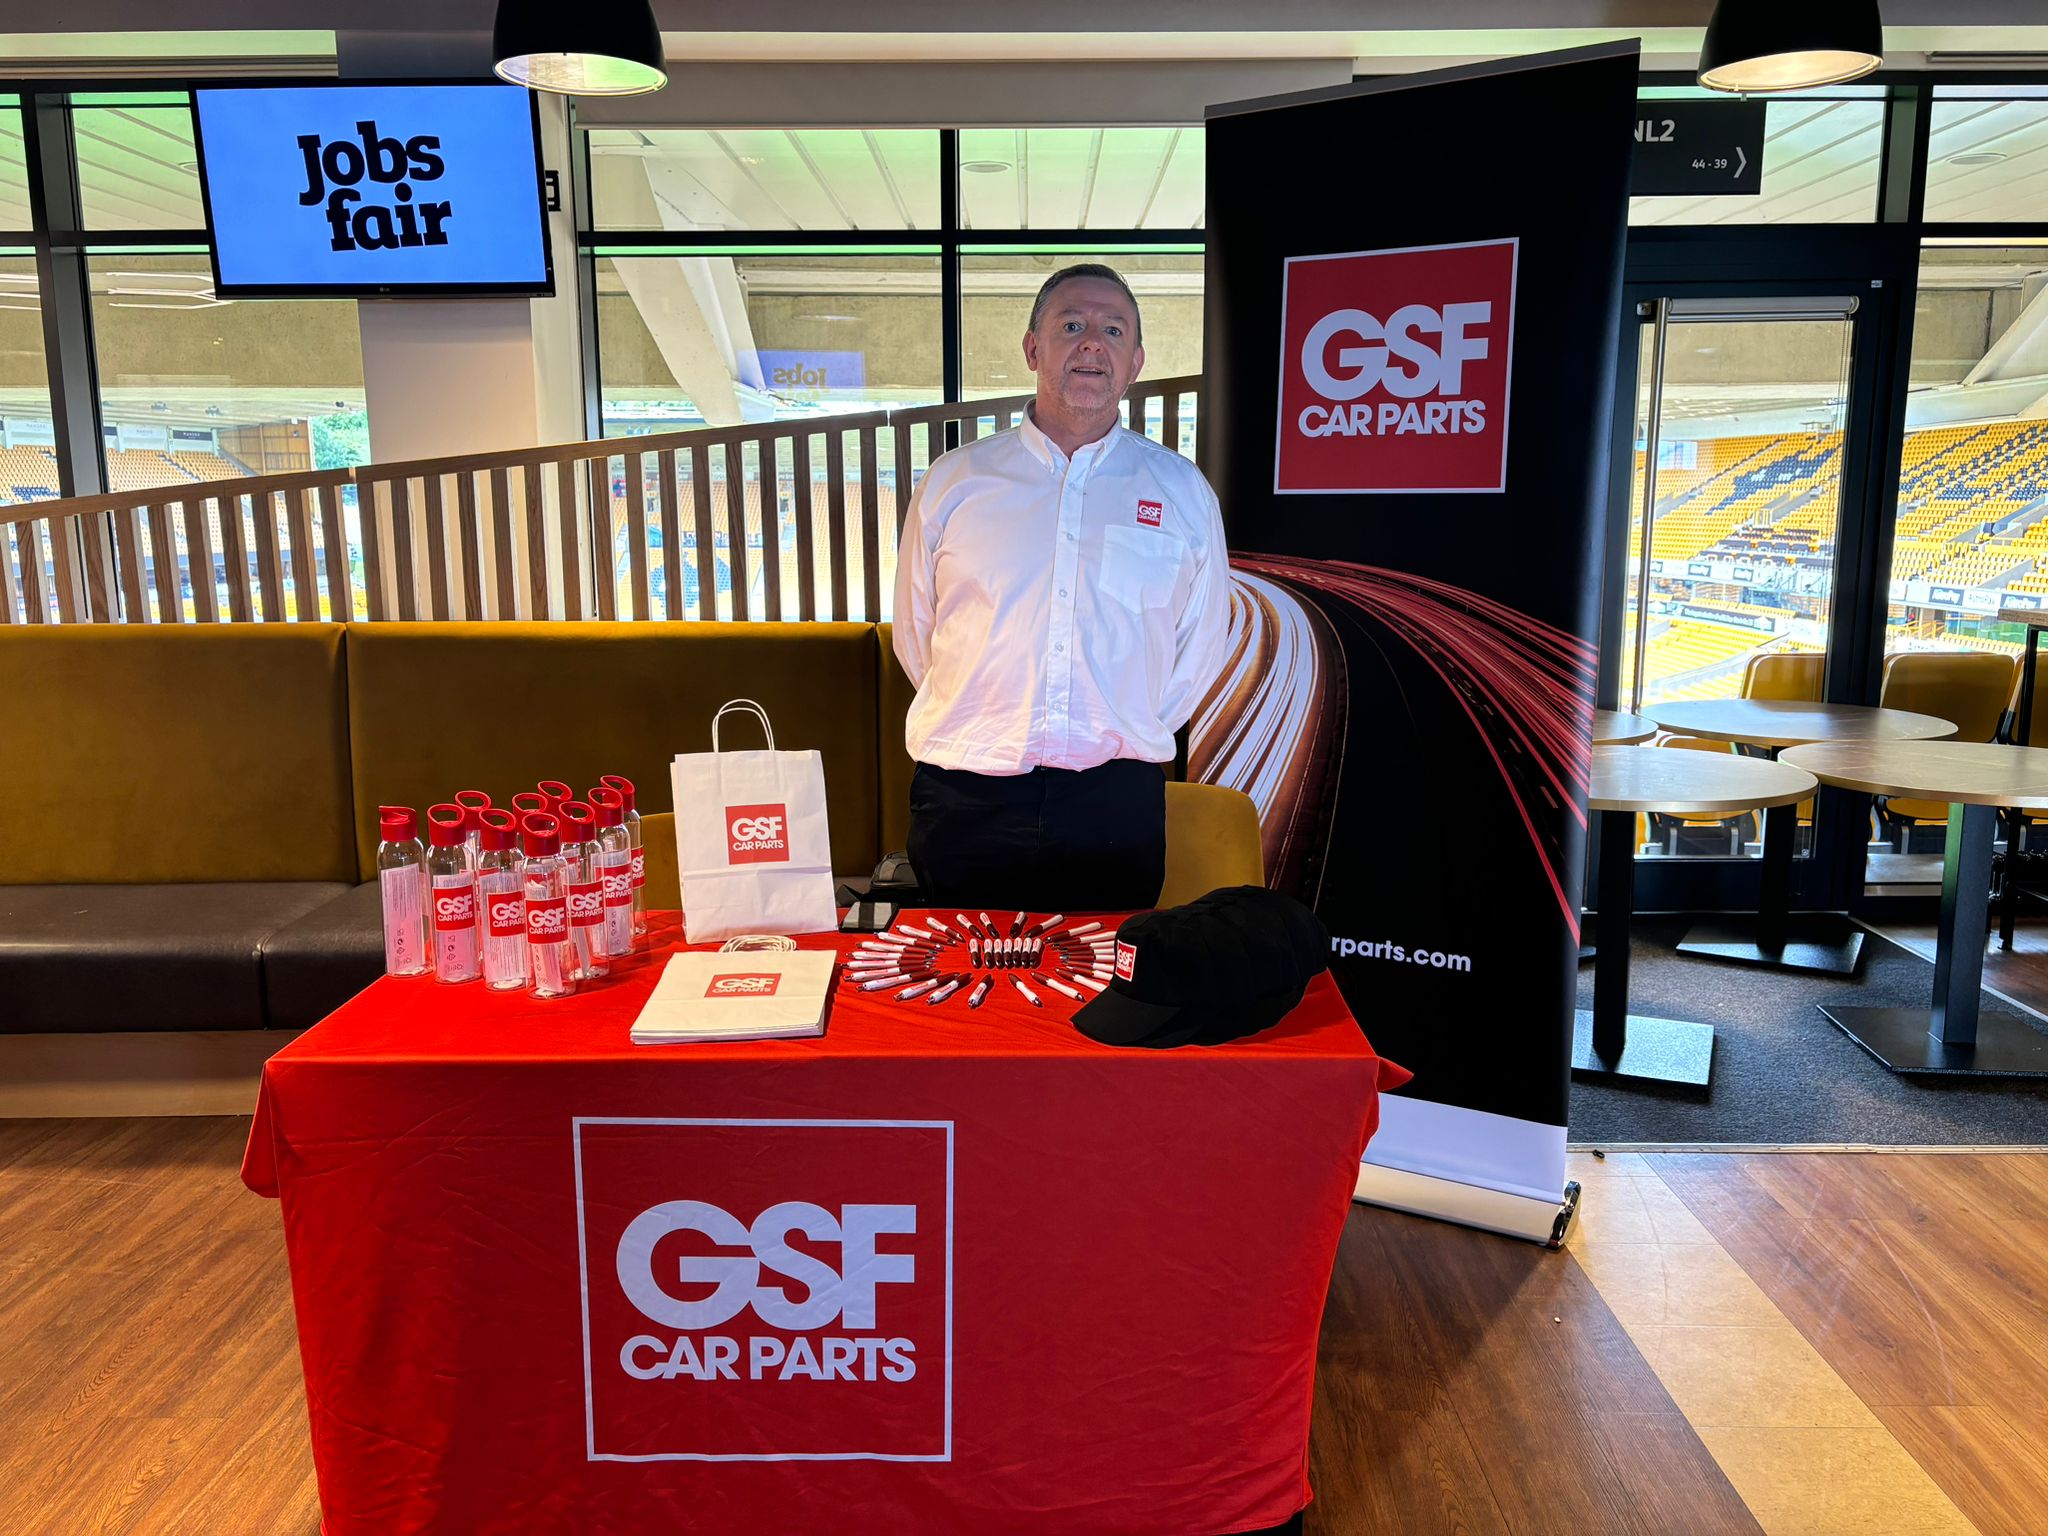 GSF Car parts at our event in Wolverhampton